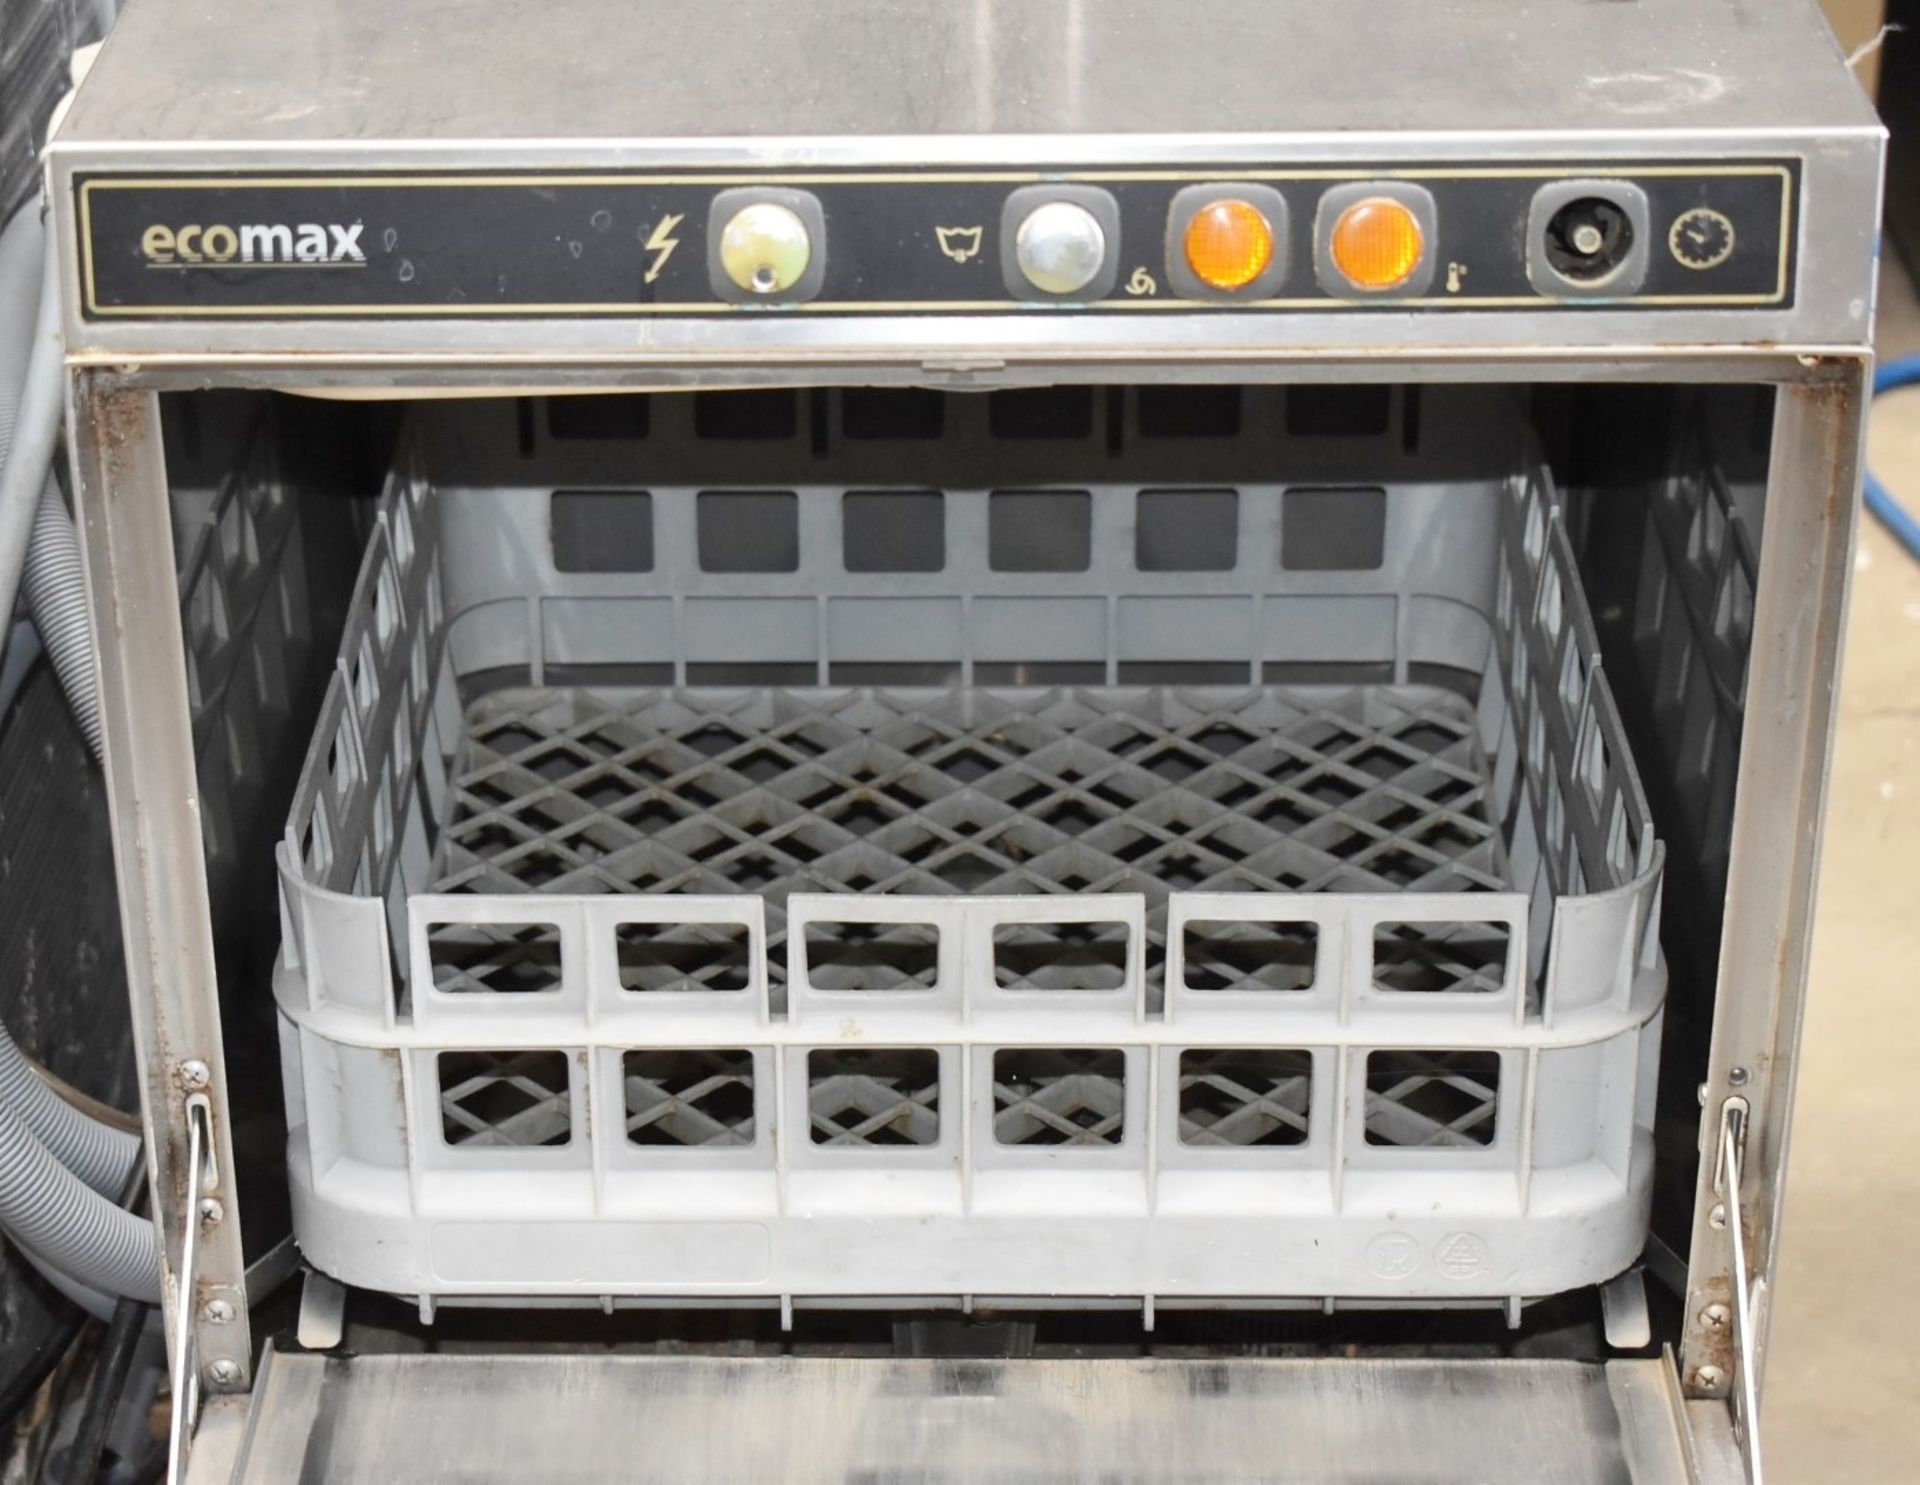 1 x Hobart Ecomax Undercounter 240v Glass Washer - Model CLG25DNA - 44cm Width - Image 5 of 10